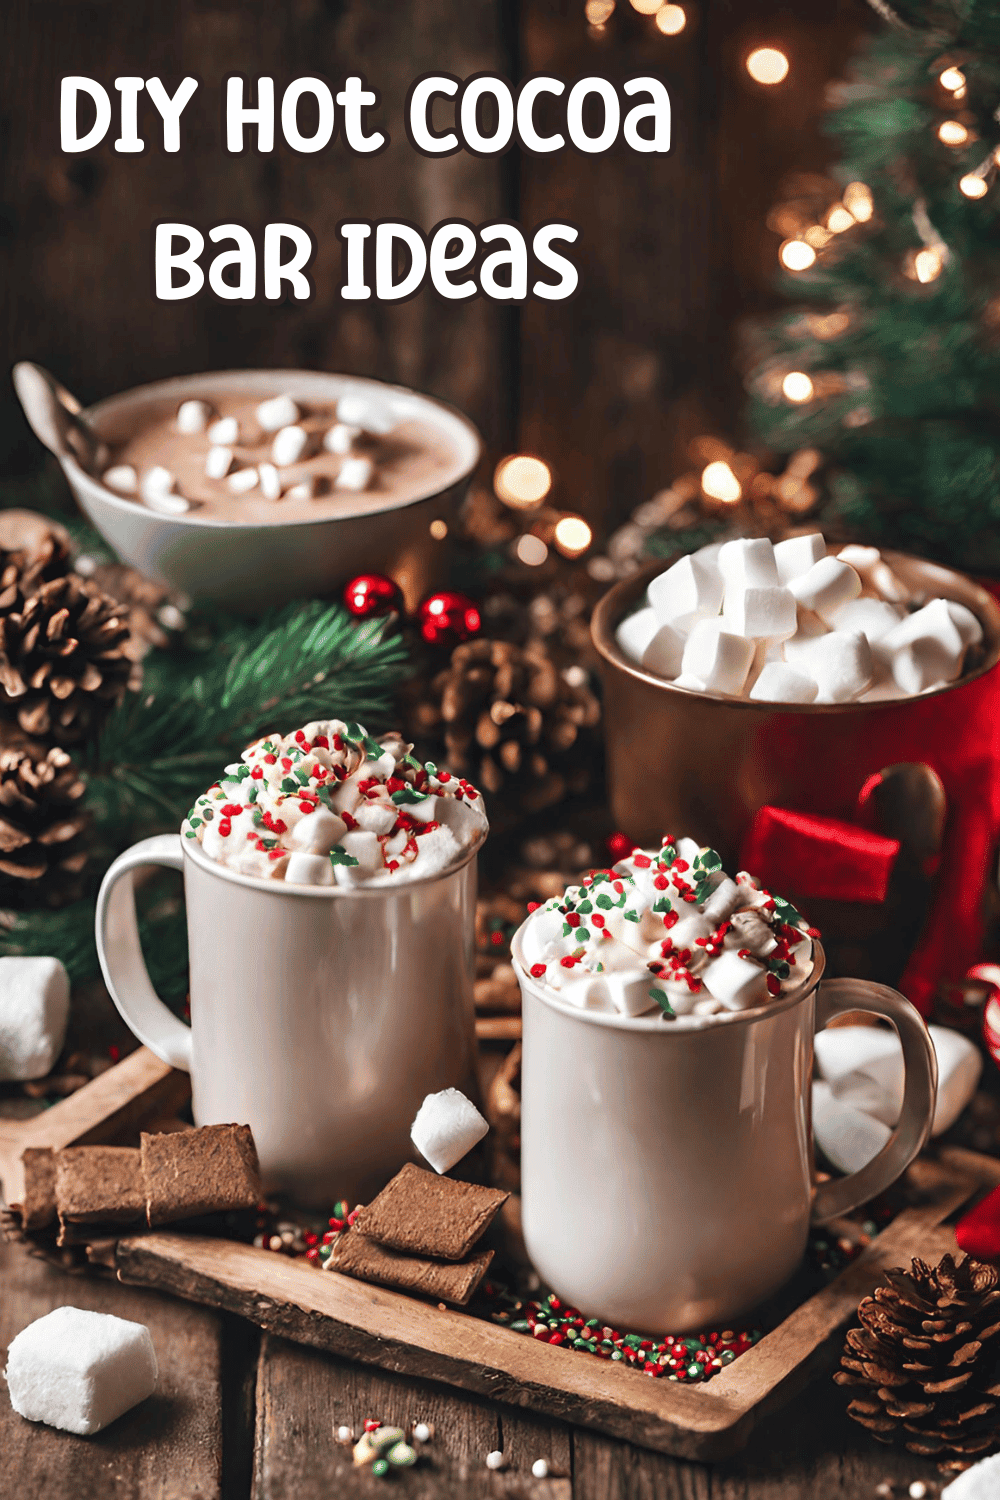 From topping lists to recipes to free printable signs & more, here's everything you need to set up the perfect DIY hot chocolate bar at your next holiday party!